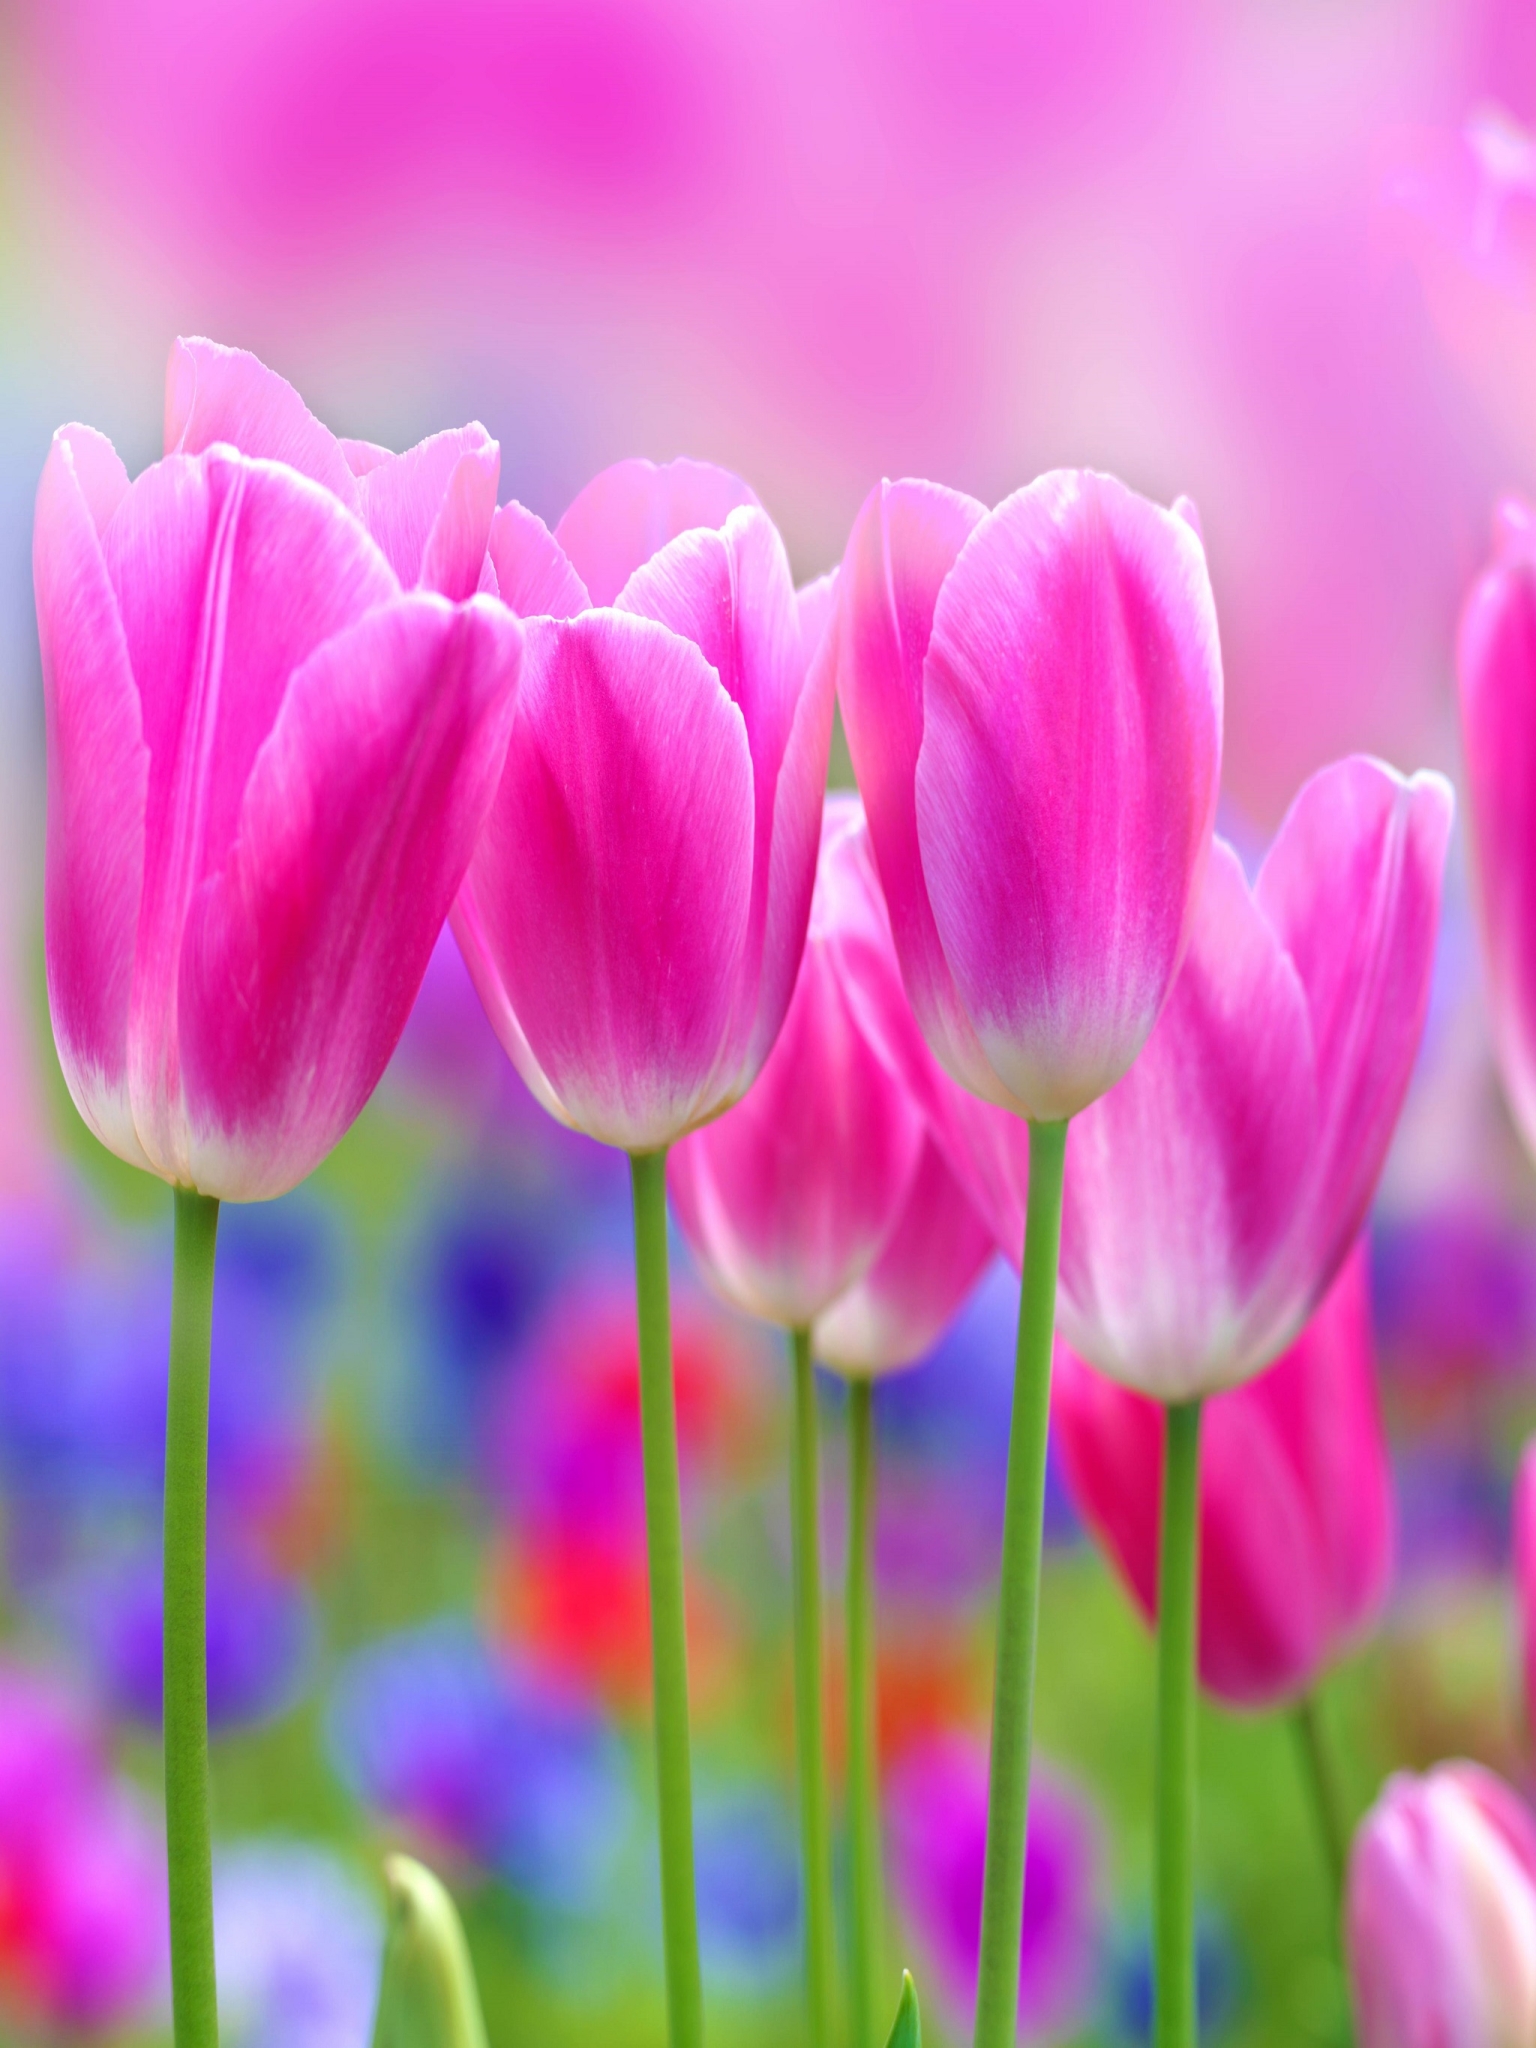 Pink Tulips for Apple iPad Air 2 resolution